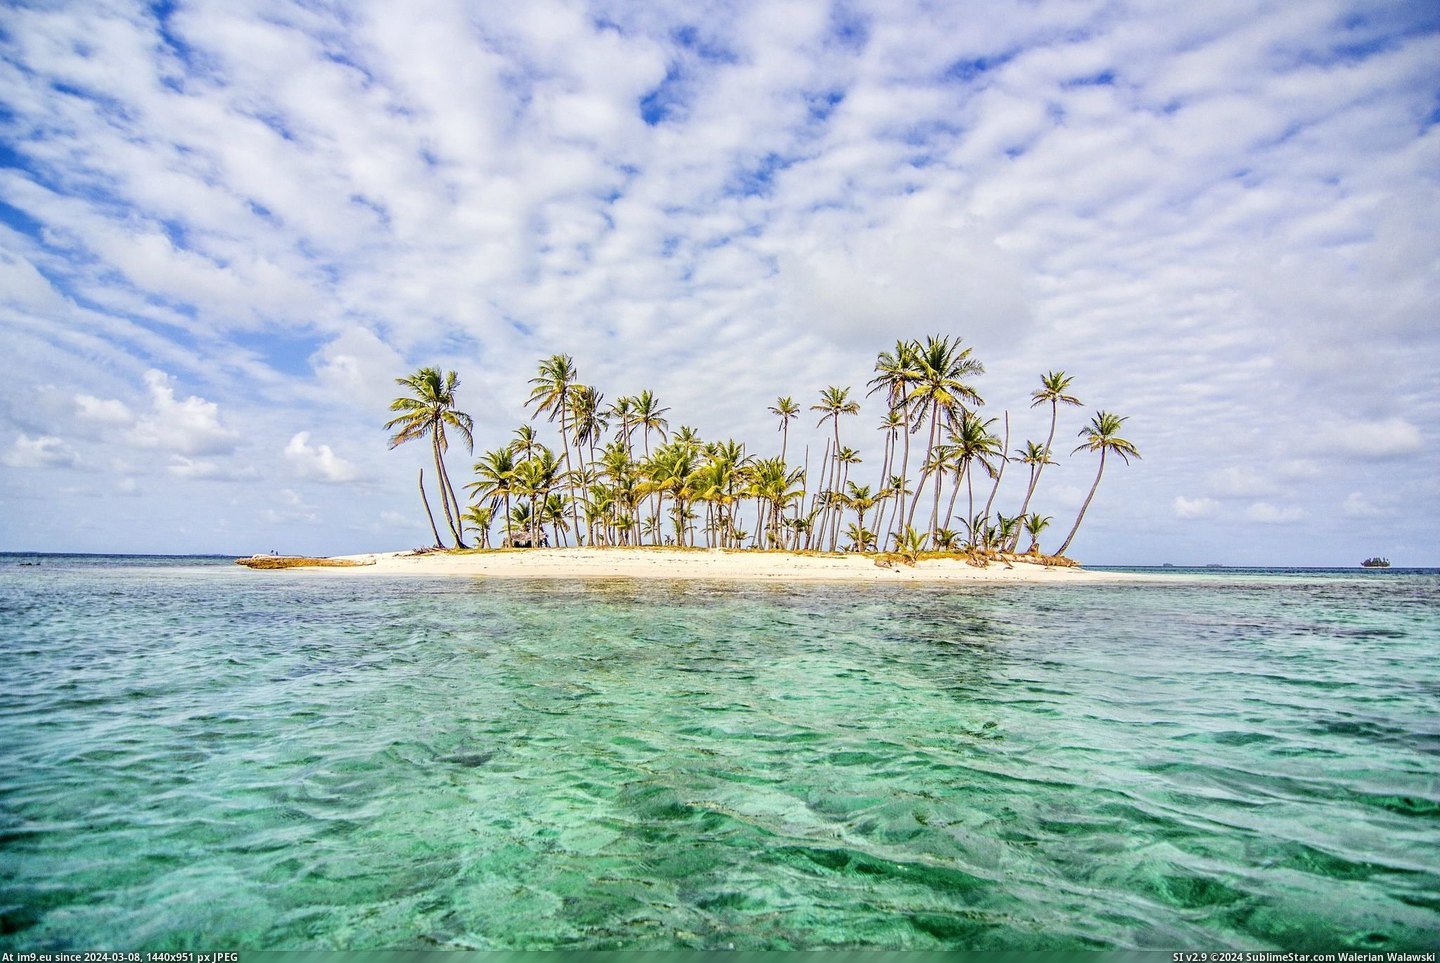 #San #Size #2048x1365 #Feb #Blas #Islands #Panama [Earthporn] San Blas Islands, Panama - There are 365 of these islands and they vary in size. Feb 2015  [2048x1365] Pic. (Изображение из альбом My r/EARTHPORN favs))